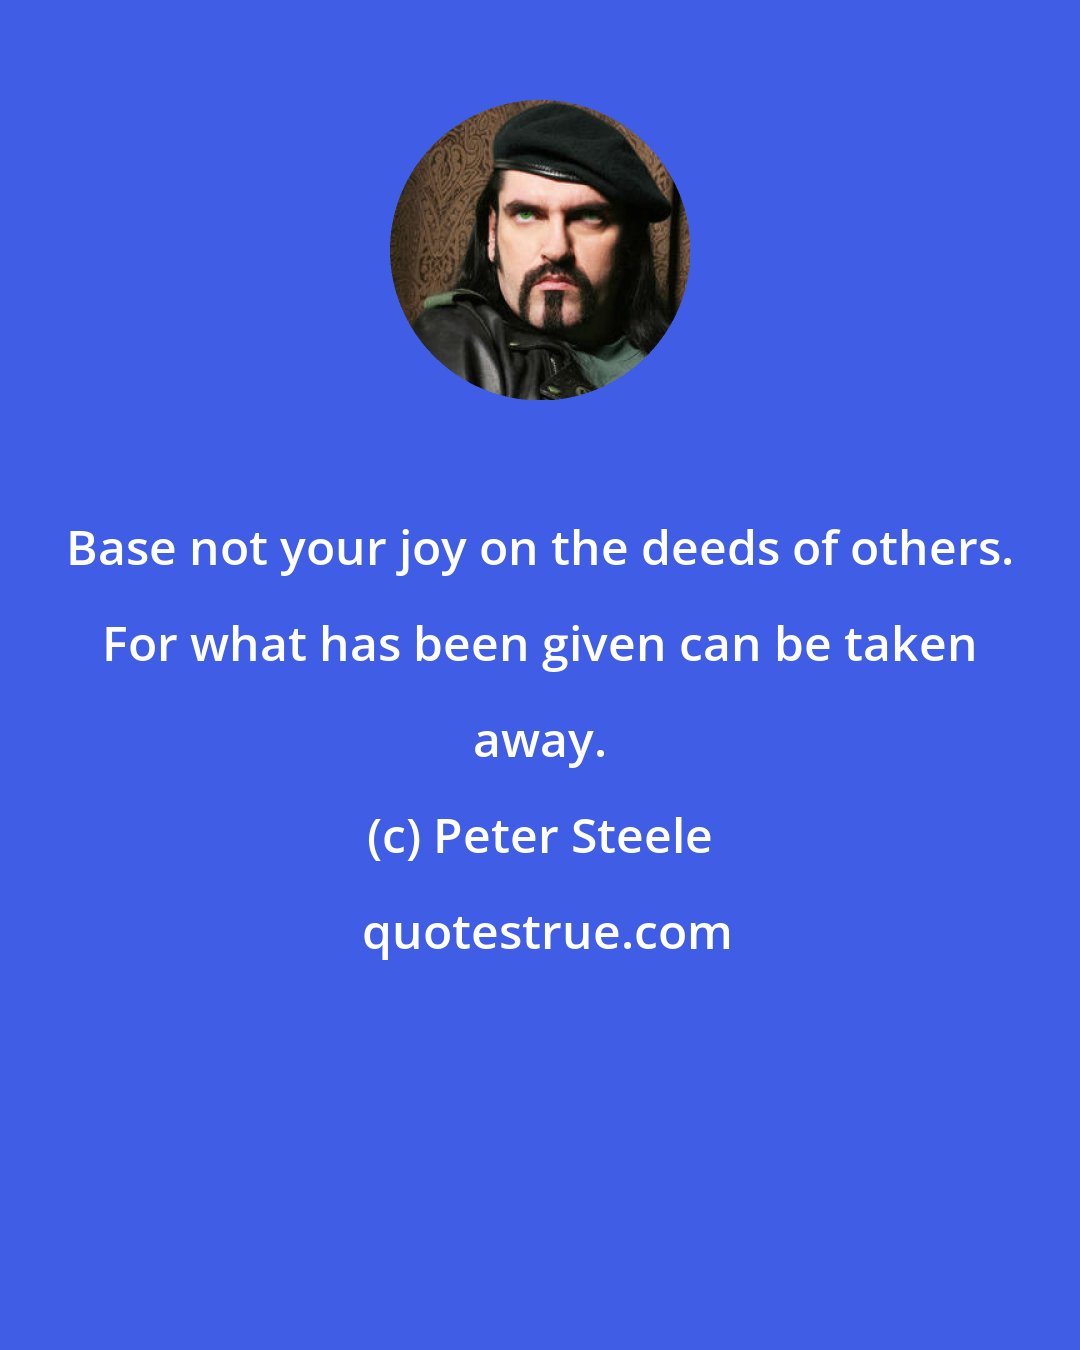 Peter Steele: Base not your joy on the deeds of others. For what has been given can be taken away.